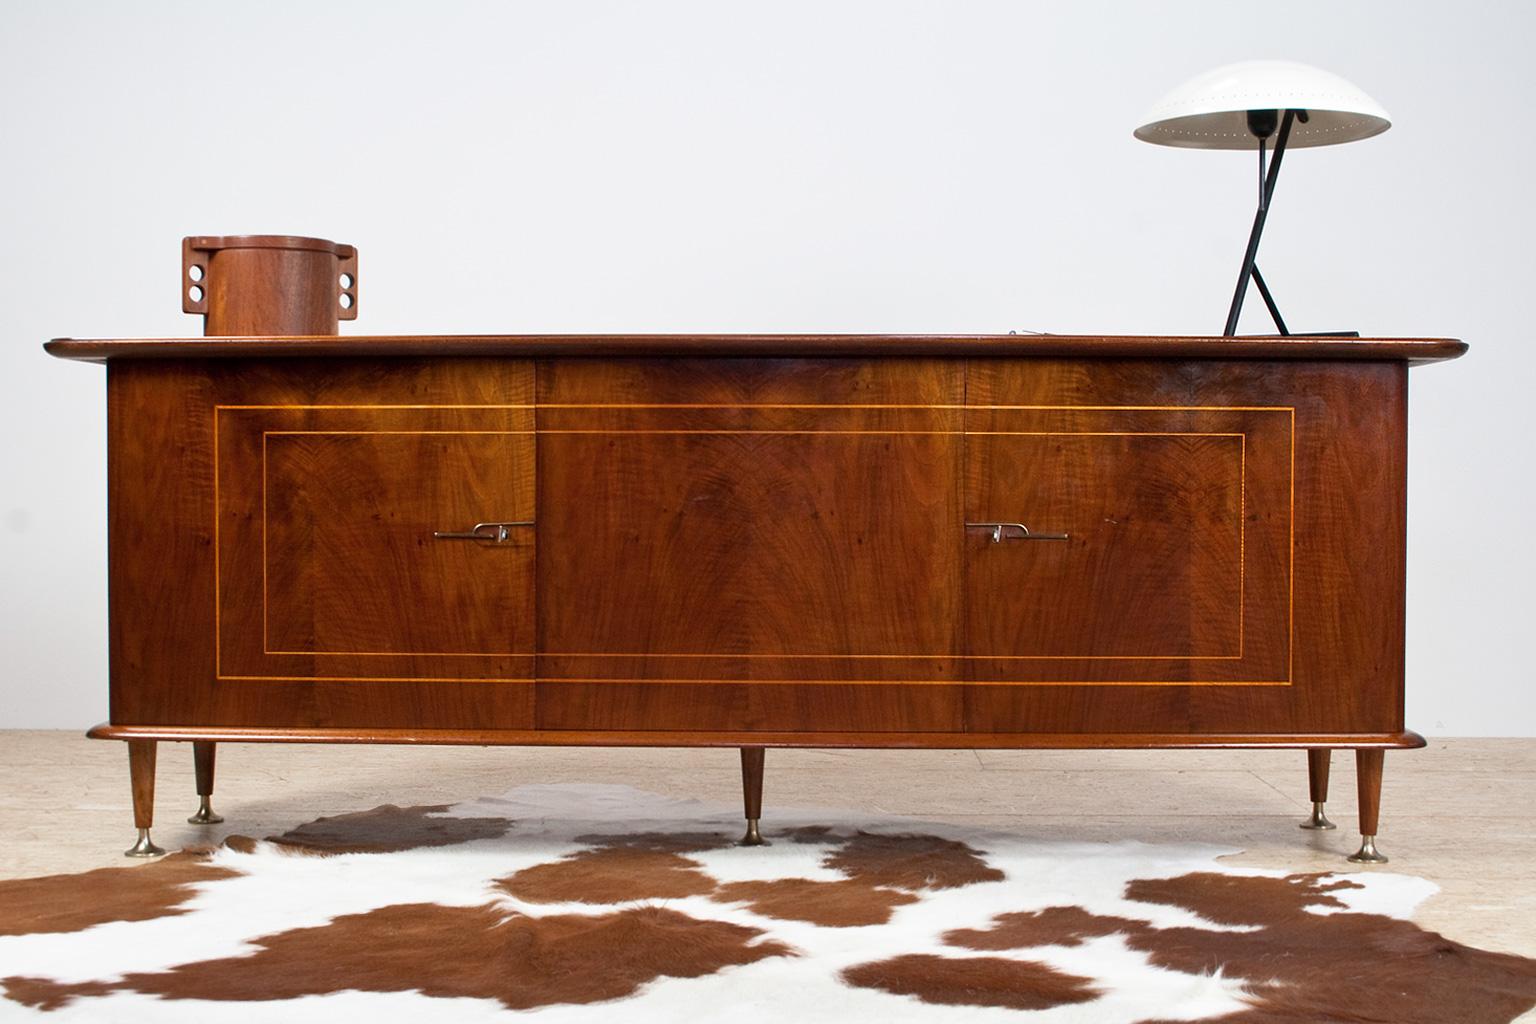 Large credenza in mahogany, walnut and brass, designed by Abraham Patijn during the early 1950s for Dutch manufacturer Zijlstra. Well executed sideboard with lovely art deco elements and a high glossy finish. The wood has a vivid look and feel with